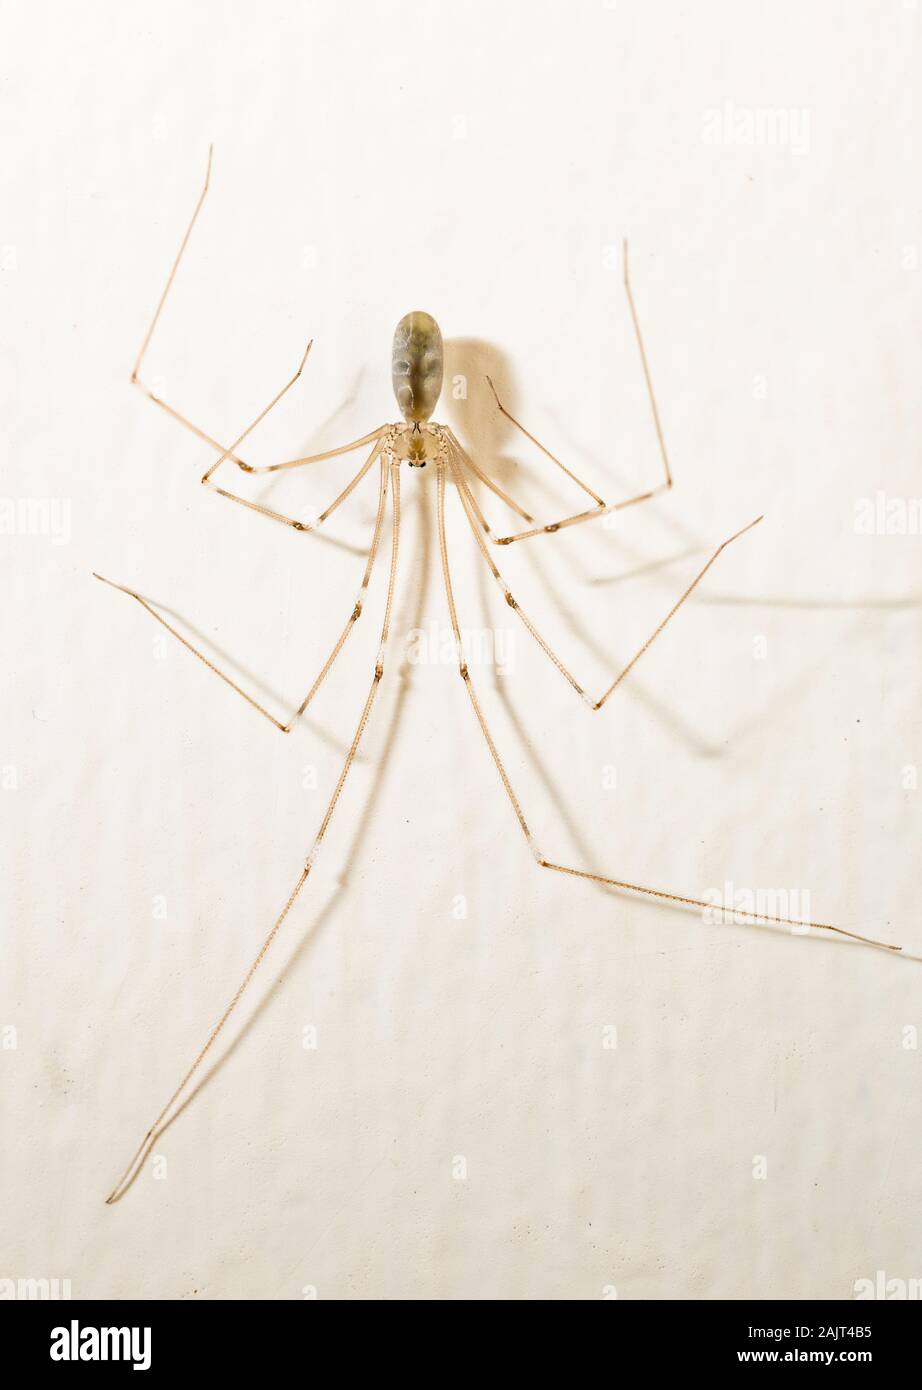 Cellar spider (Pholcidae) on a wall inside a house. Stock Photo